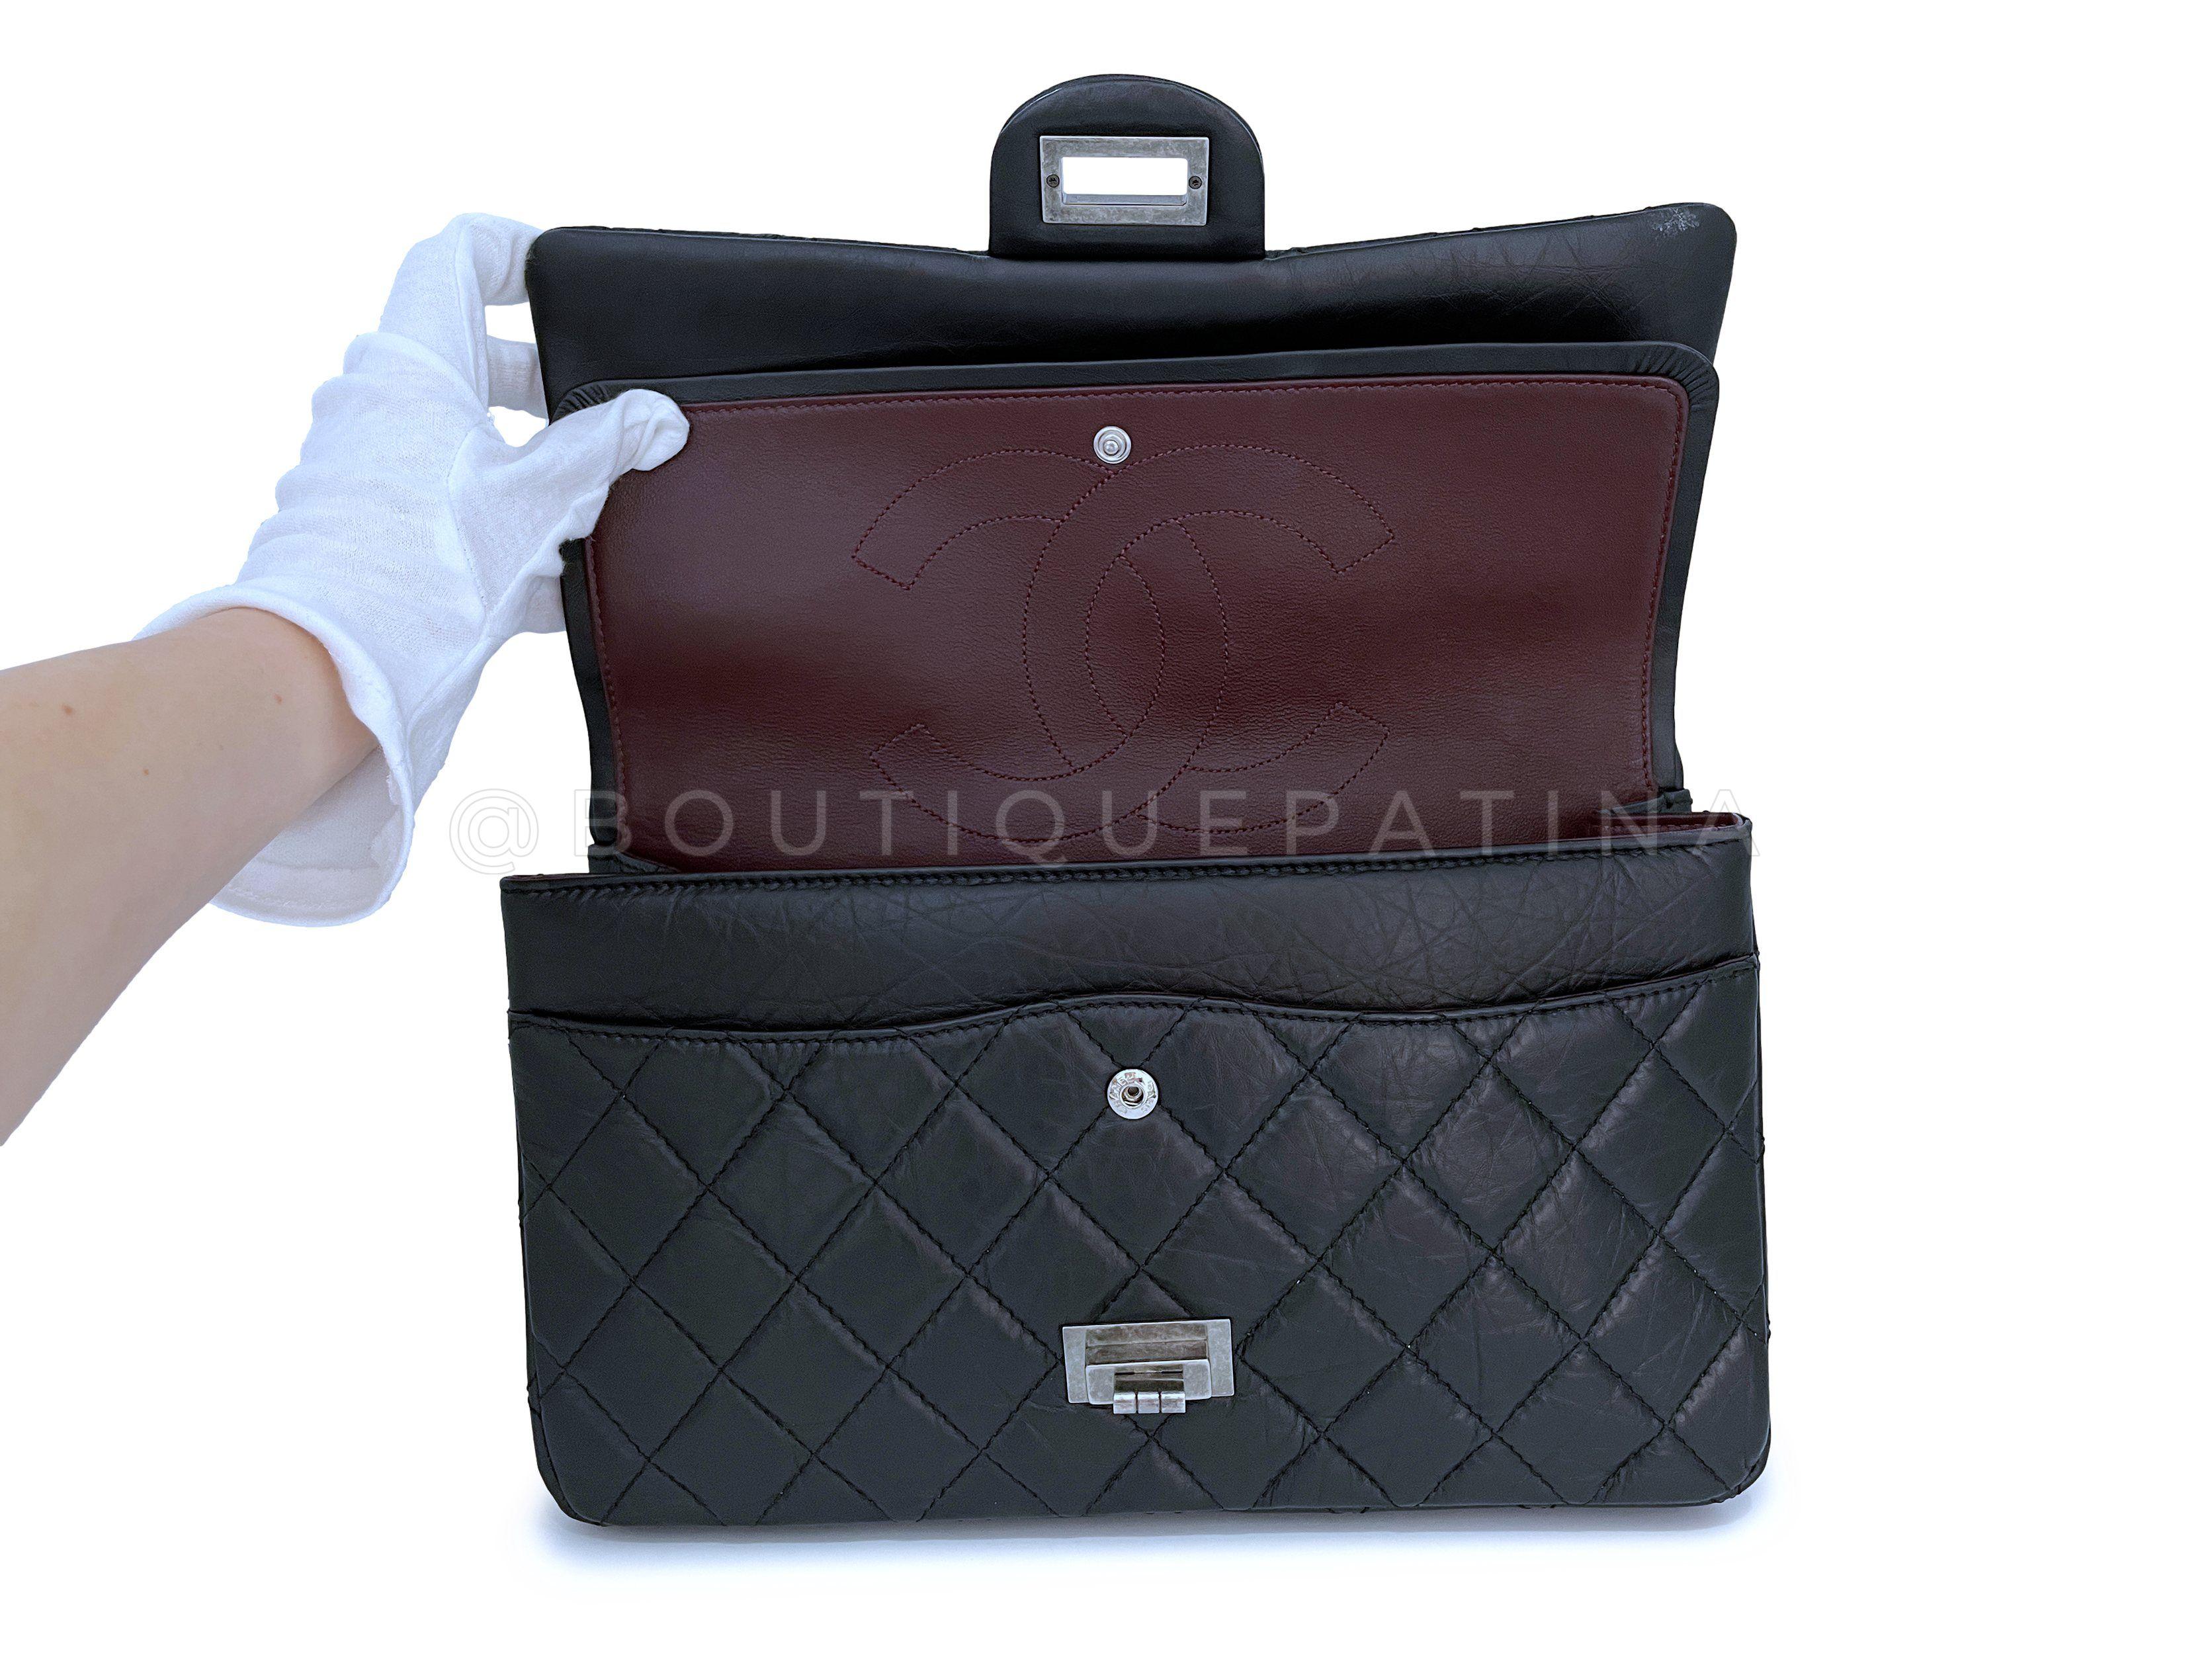 Pristine Chanel Black Aged Calfskin 2.55 Reissue 227 Double Flap Bag RHW 64730 For Sale 5